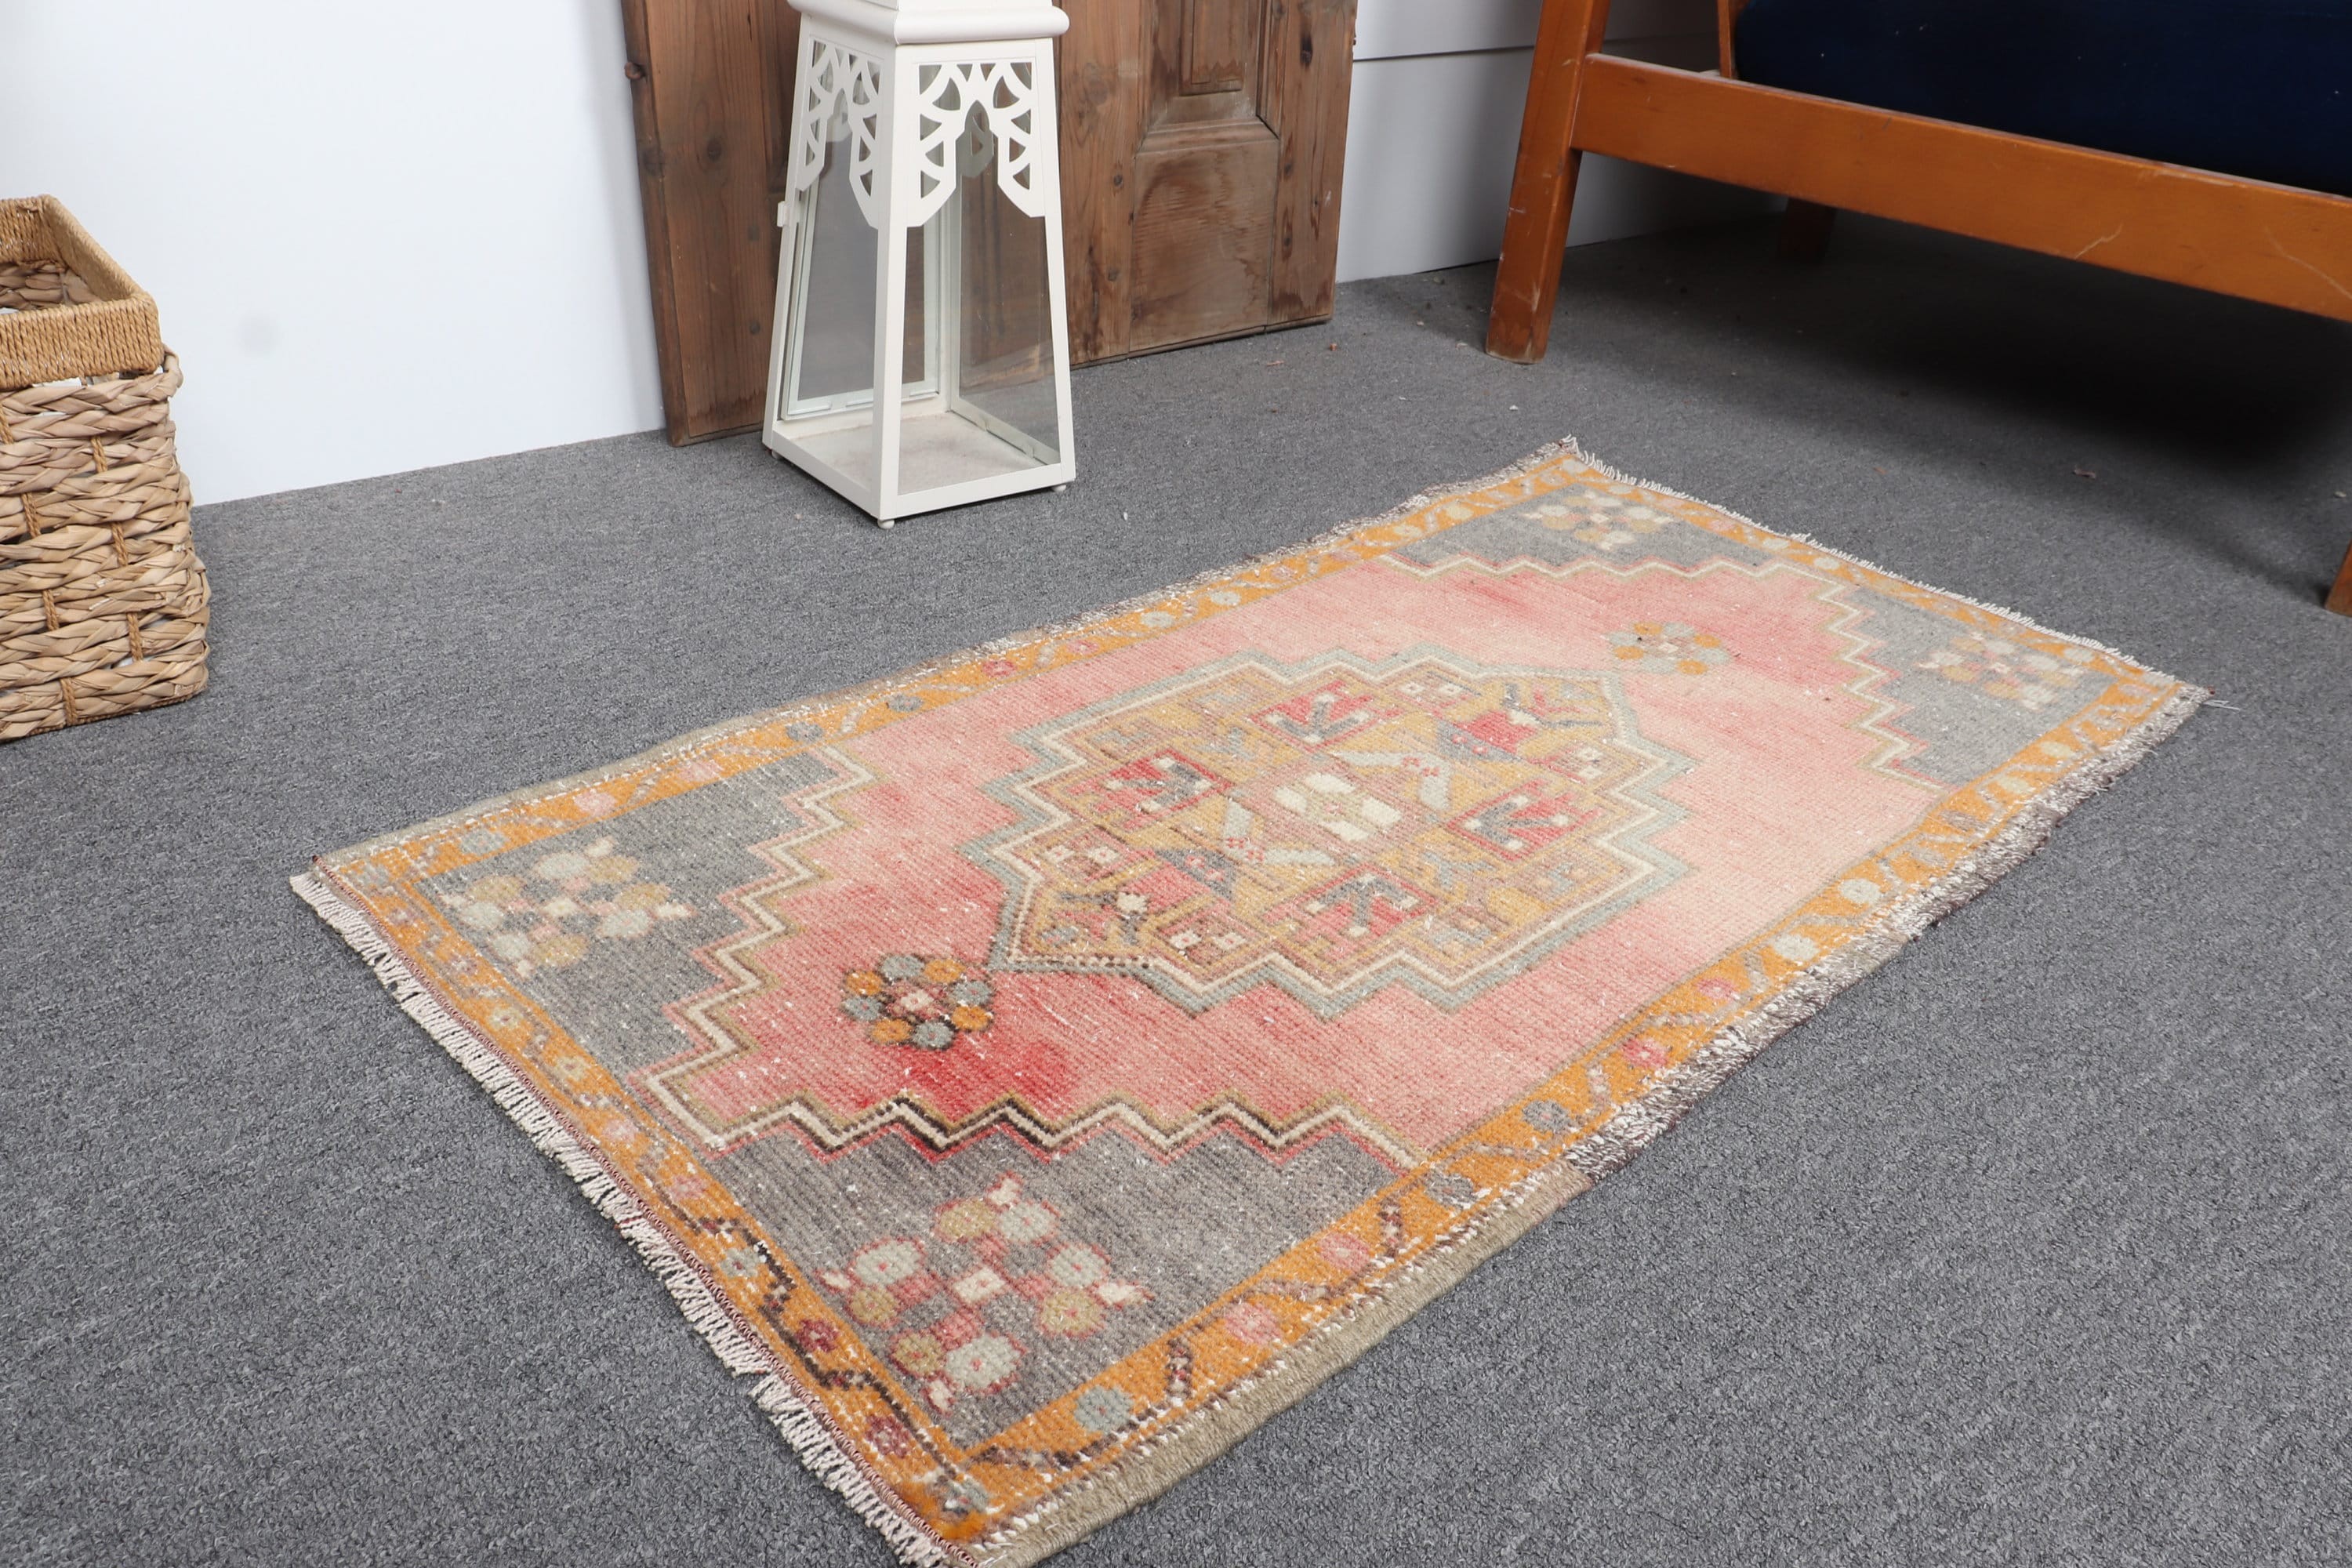 Home Decor Rugs, 1.7x3.3 ft Small Rug, Rugs for Wall Hanging, Vintage Rugs, Pink Antique Rugs, Kitchen Rugs, Nursery Rug, Turkish Rug